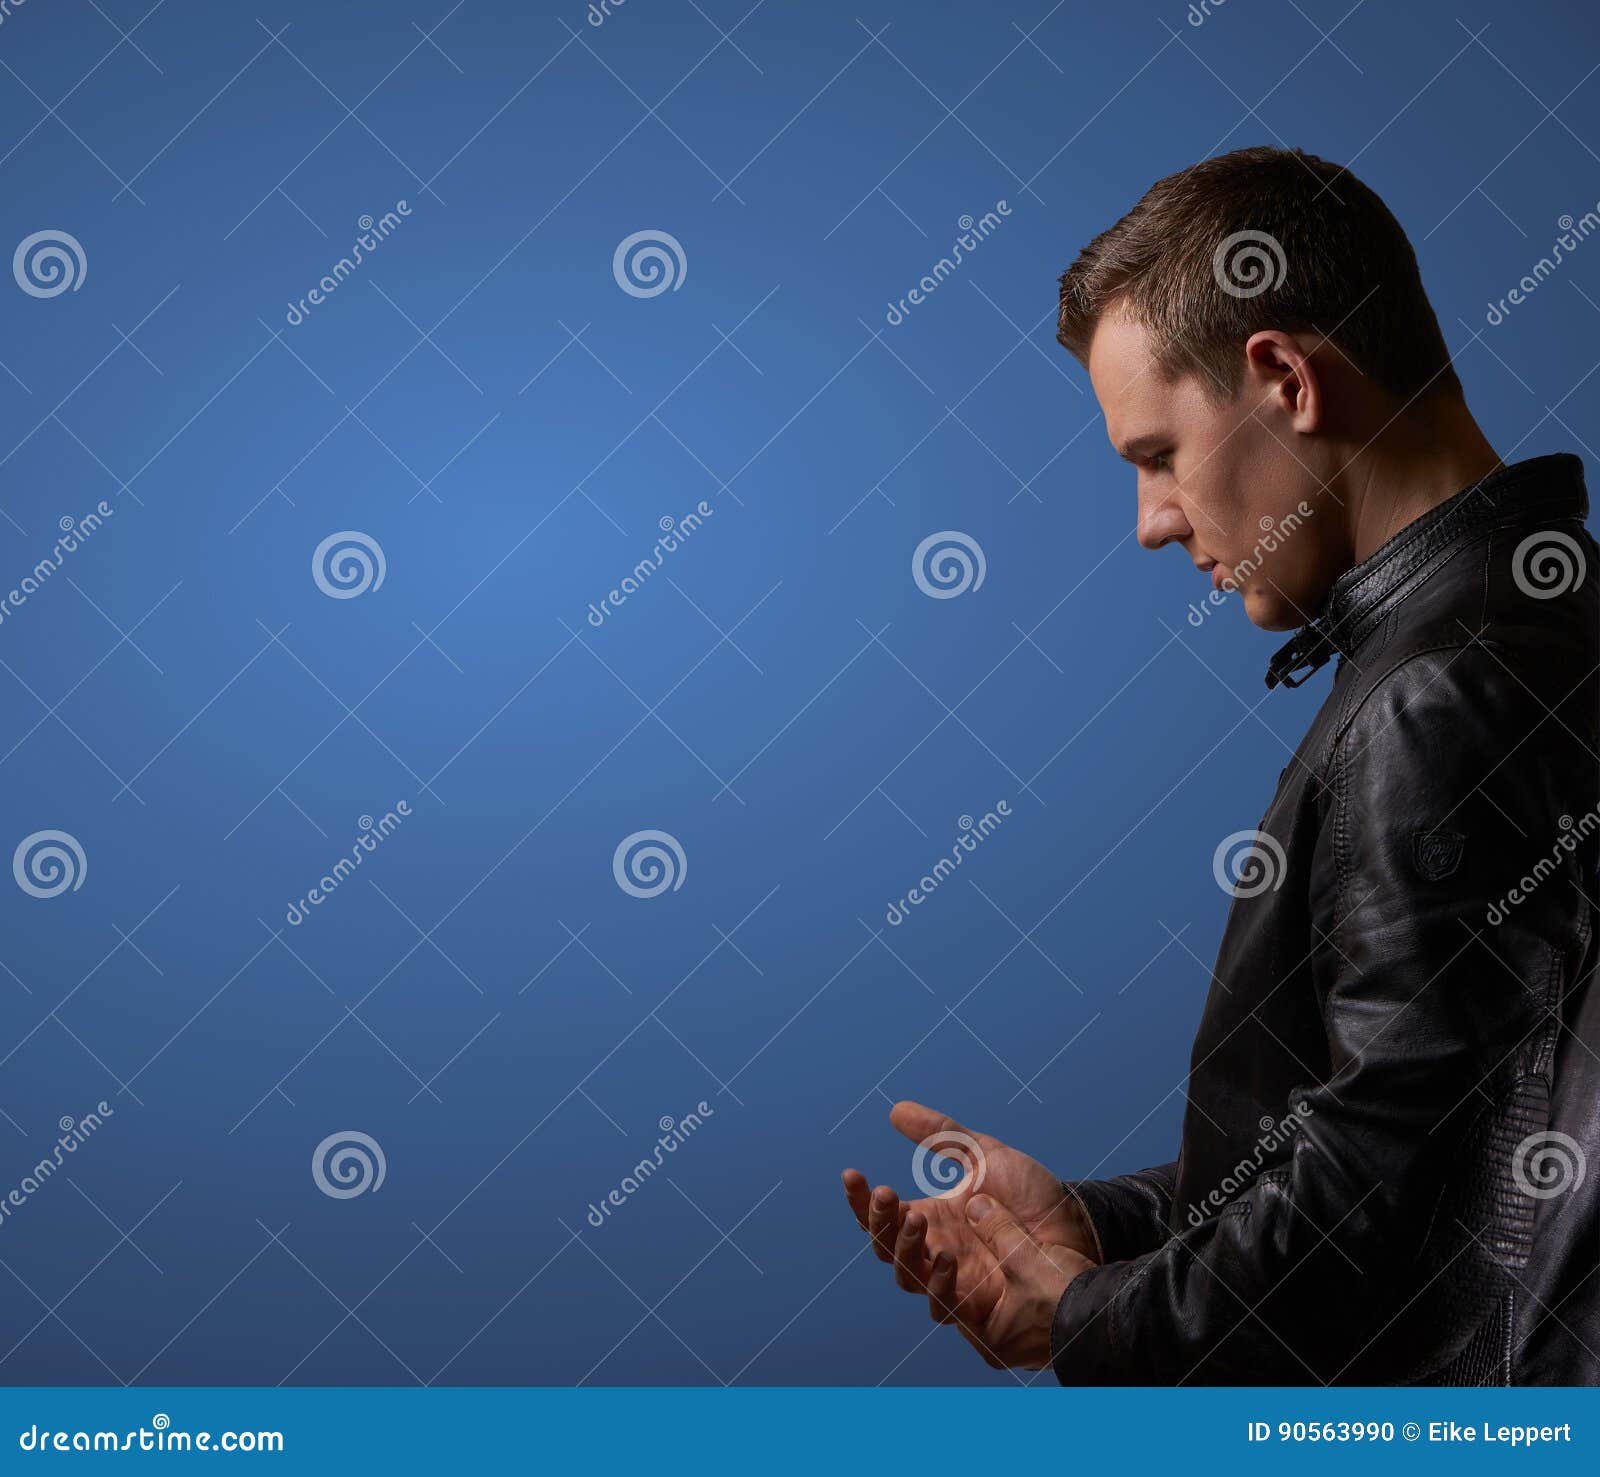 profil shot from a young man in leatherjacket, rubbing his hand with copyspace